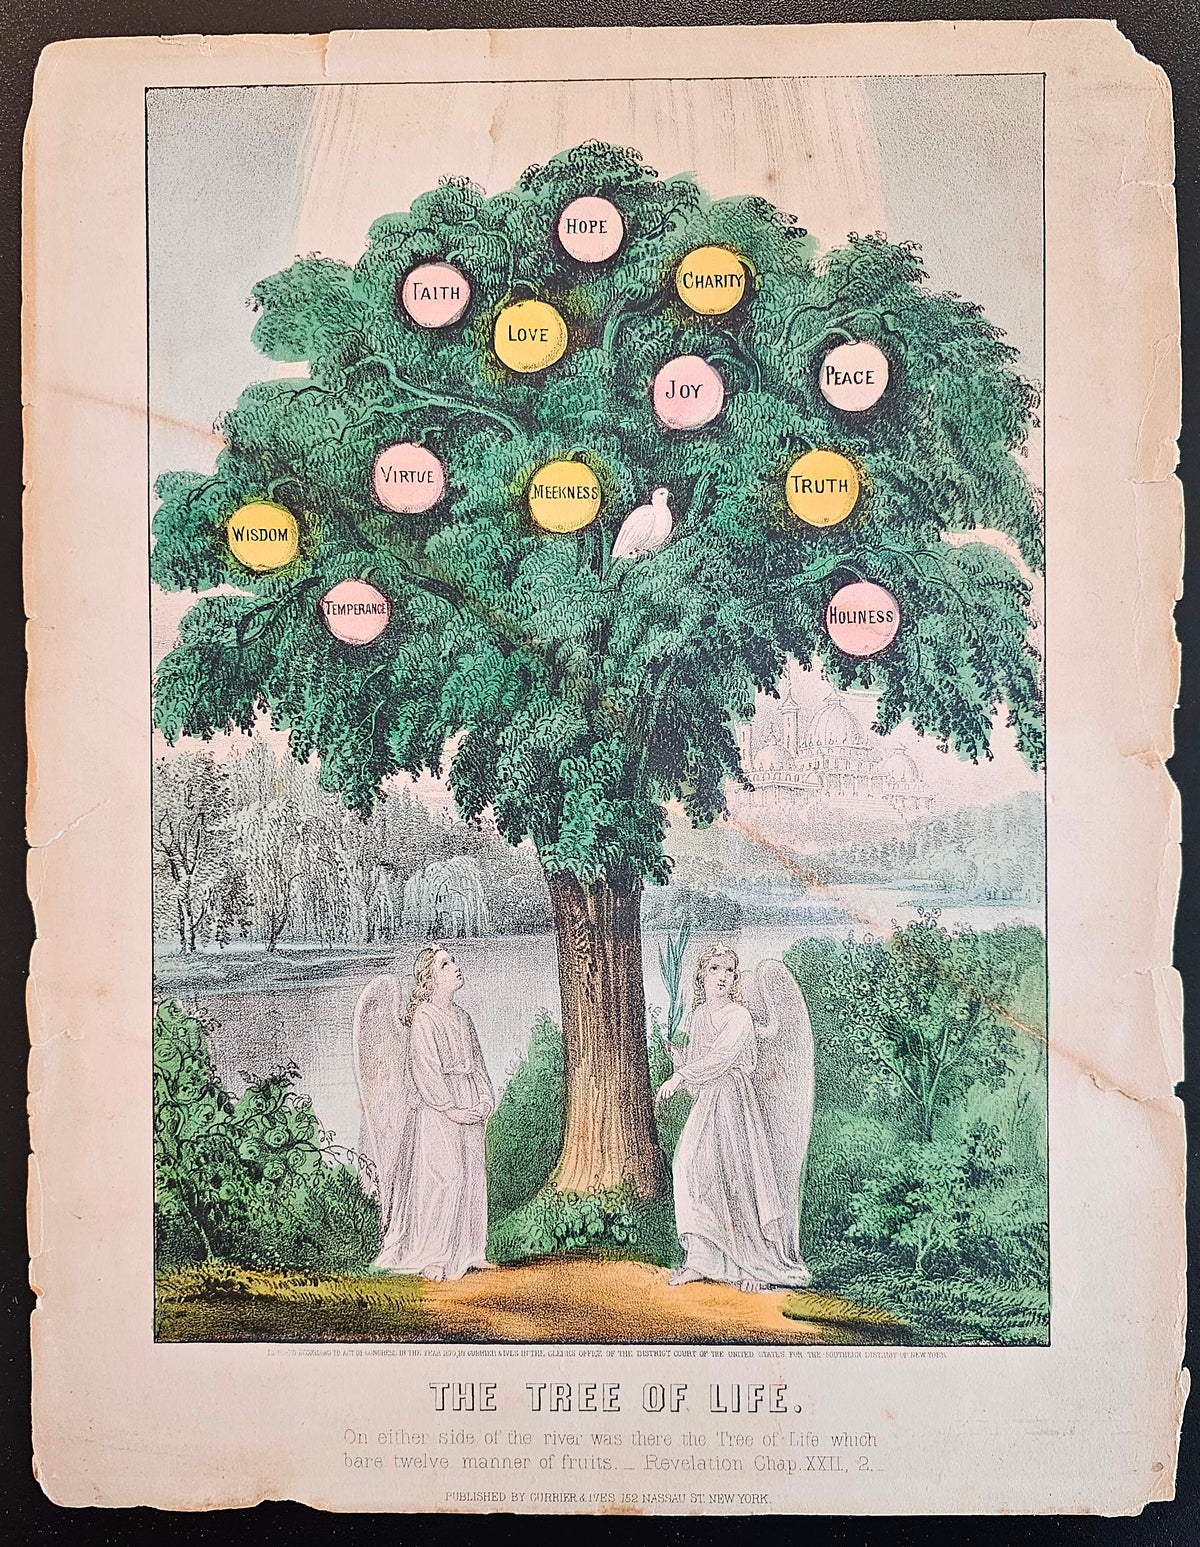 The Tree of Life - Authentic Vintage Antique Print